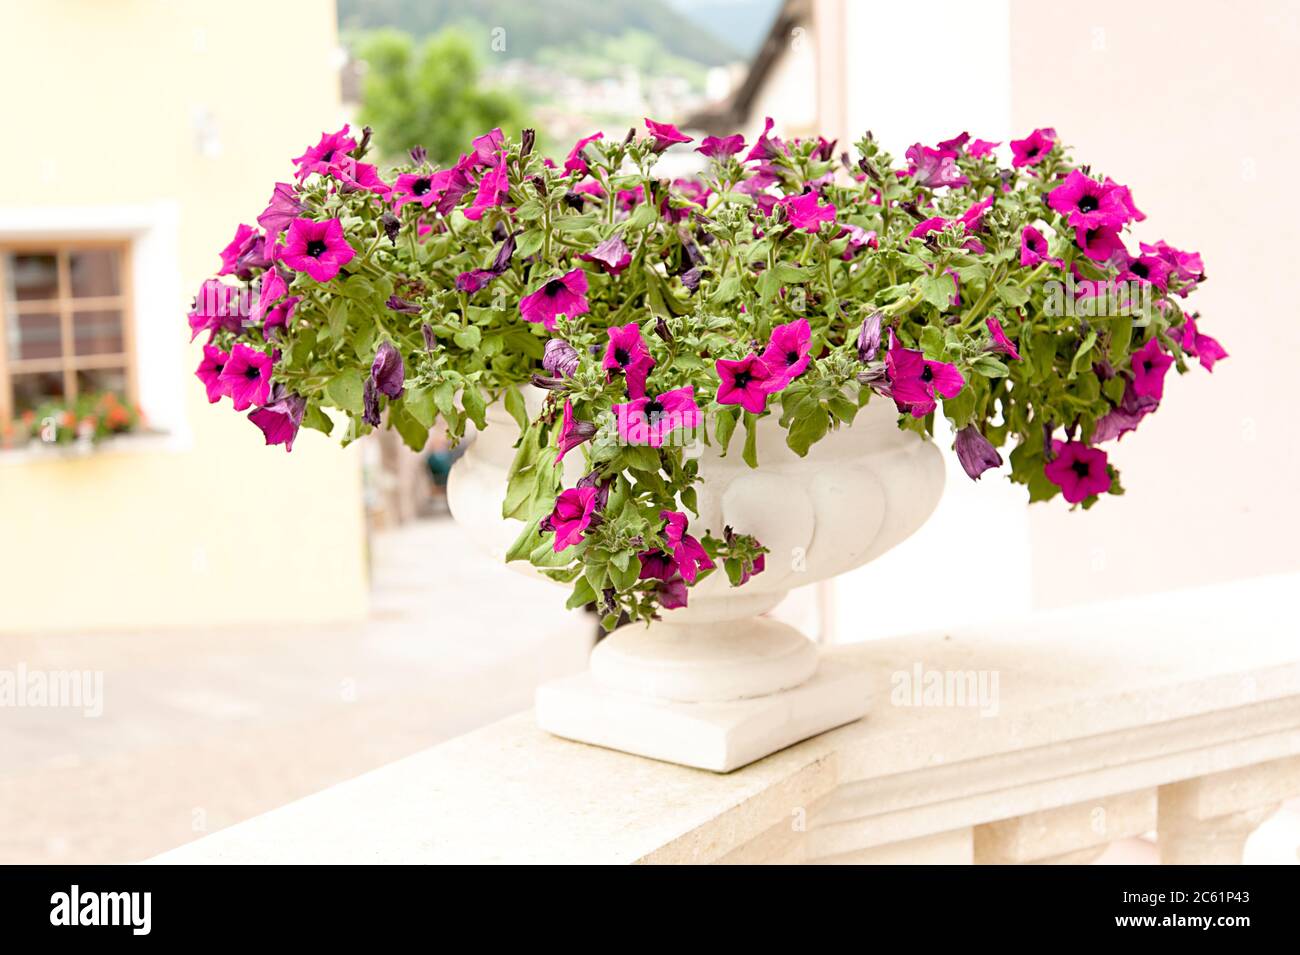 A pretty pink cerise busy Lizzie plant overflowing a white ceramic Italian style plant pot in late spring Stock Photo